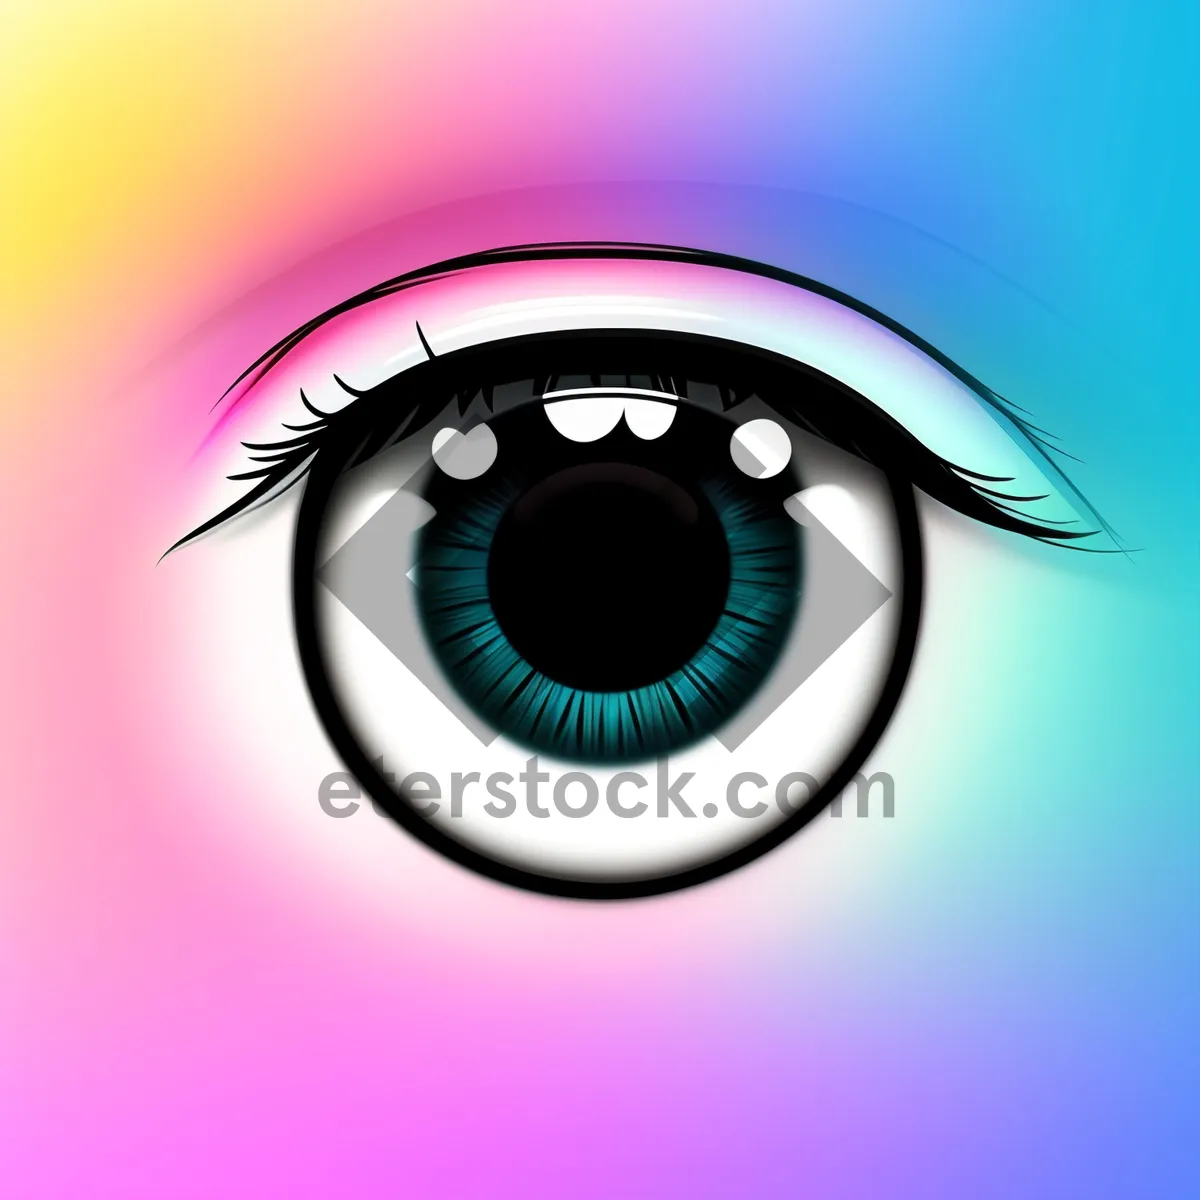 Picture of Eyecon: Graphic Circle Symbol with See-Through Eyebrow Design